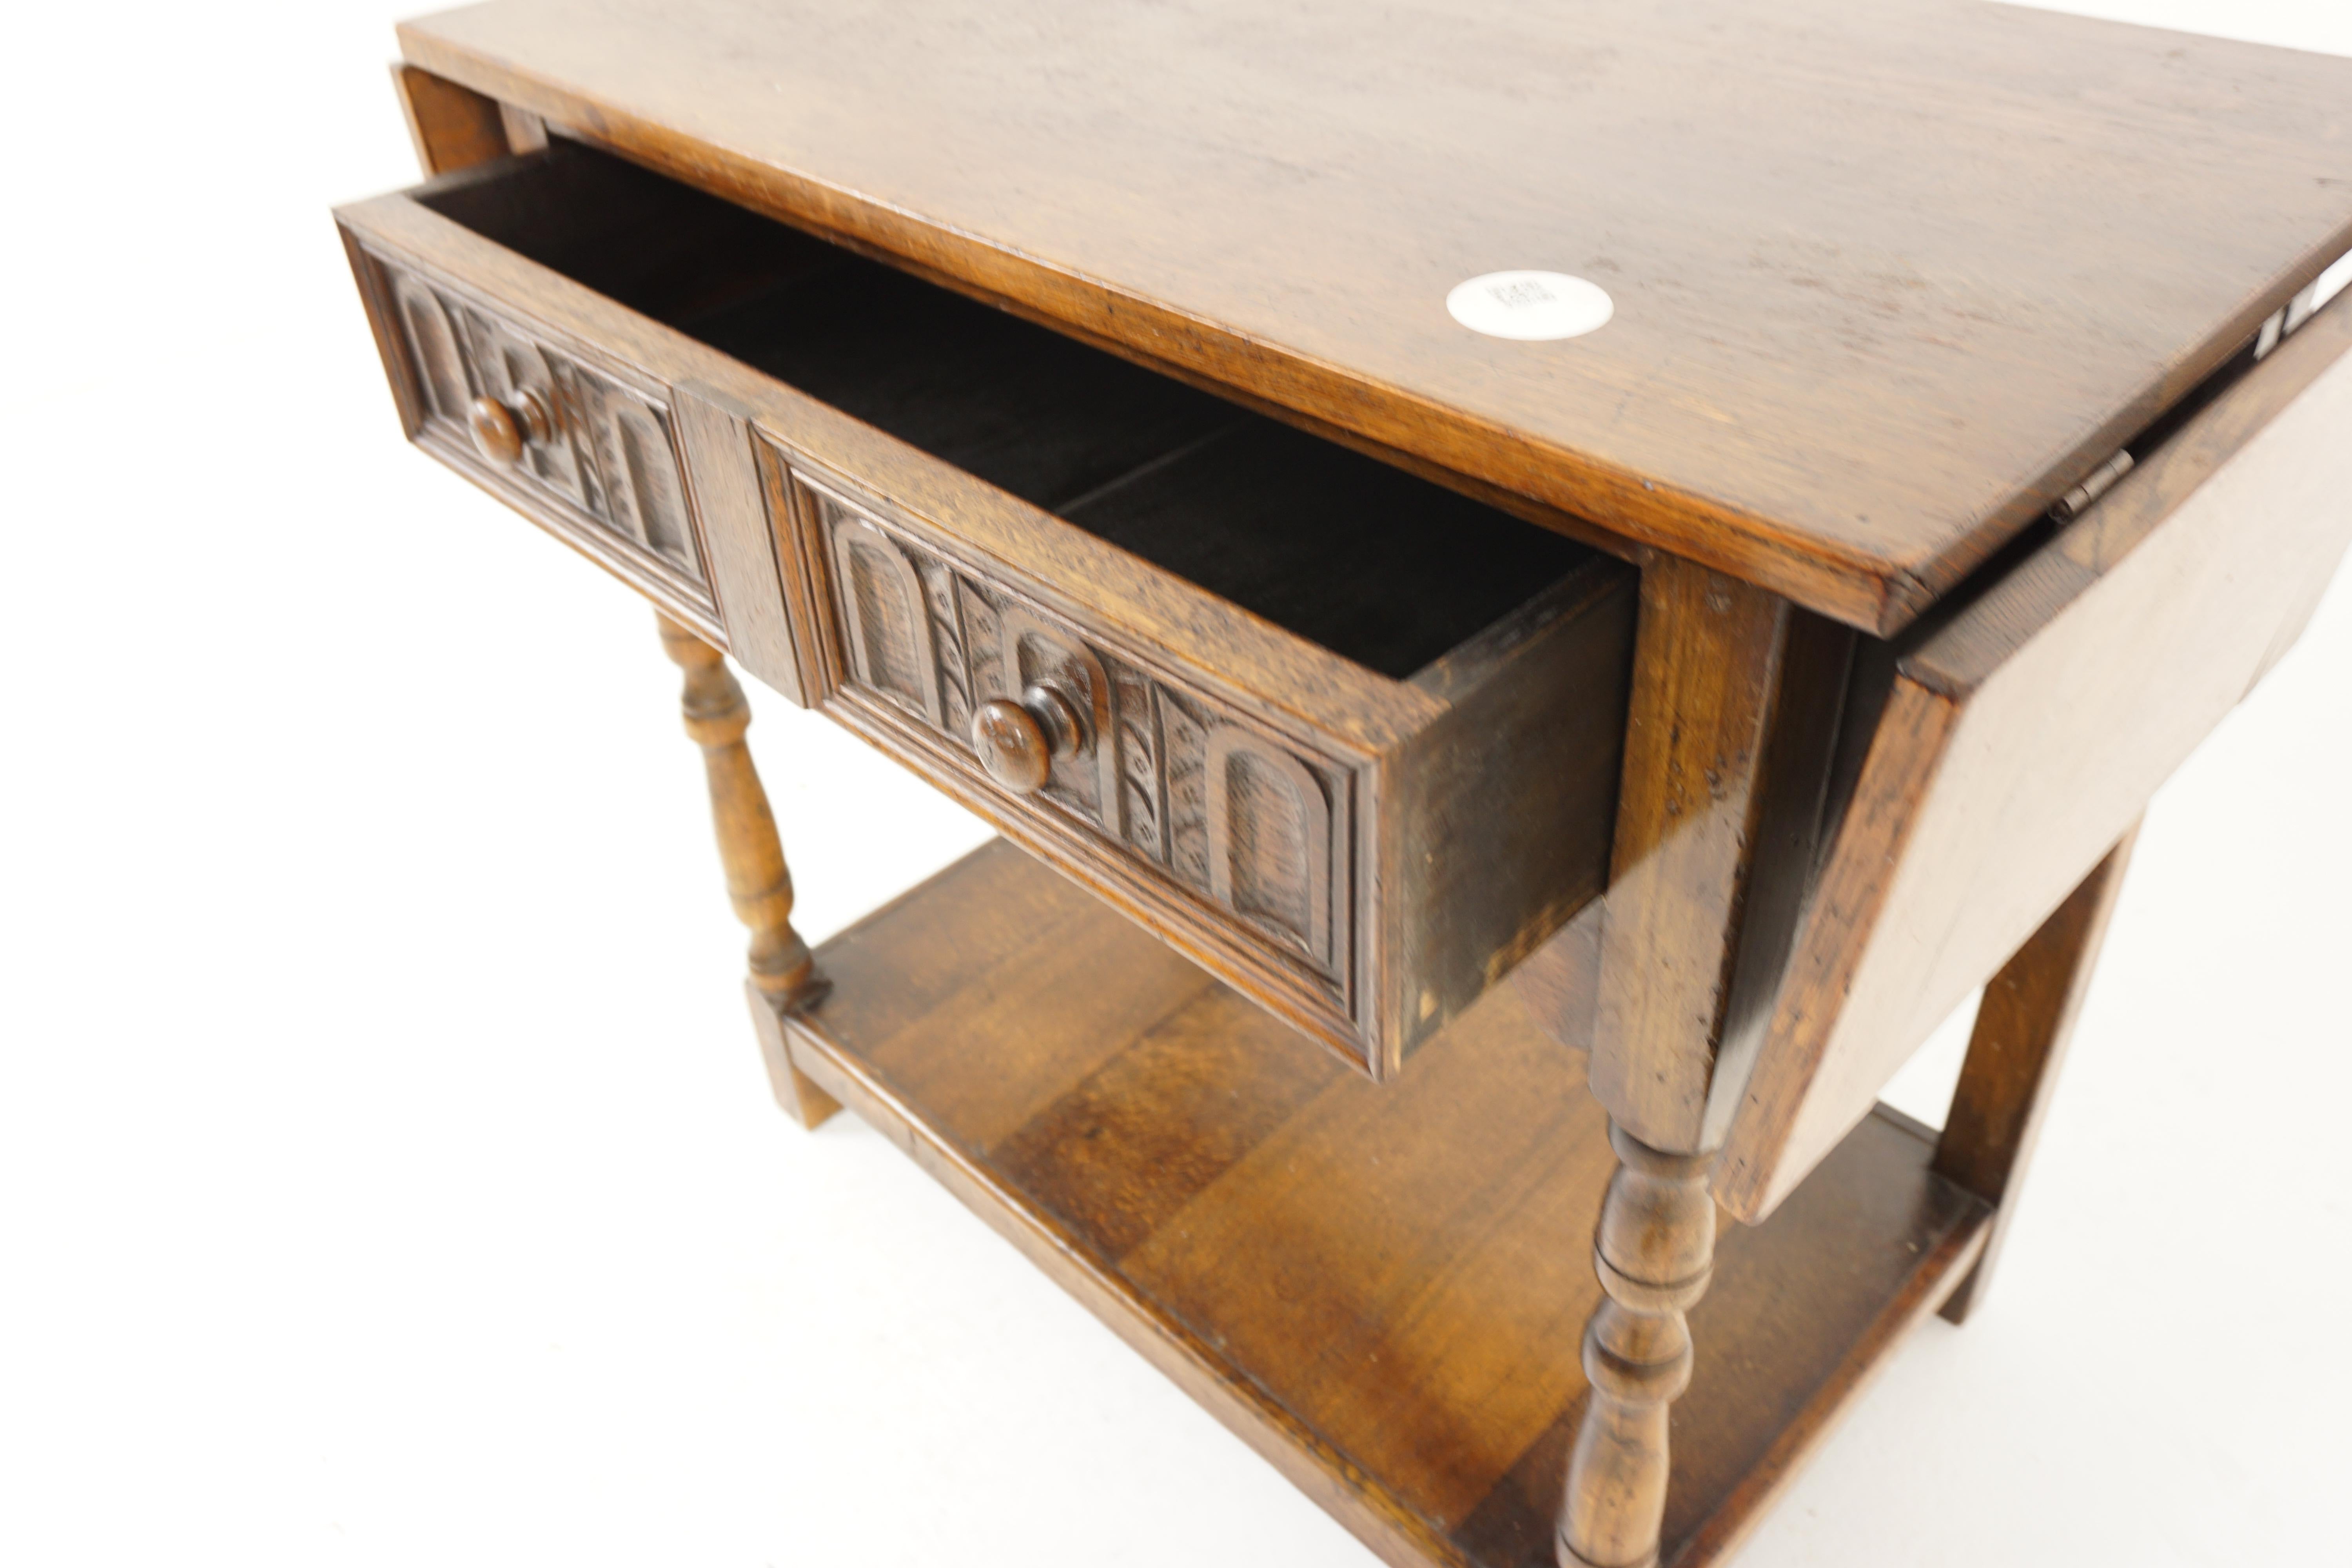 Scottish Antique Oak Table, Serving Table with Leaves, Hall Table, Scotland 1930, H1053